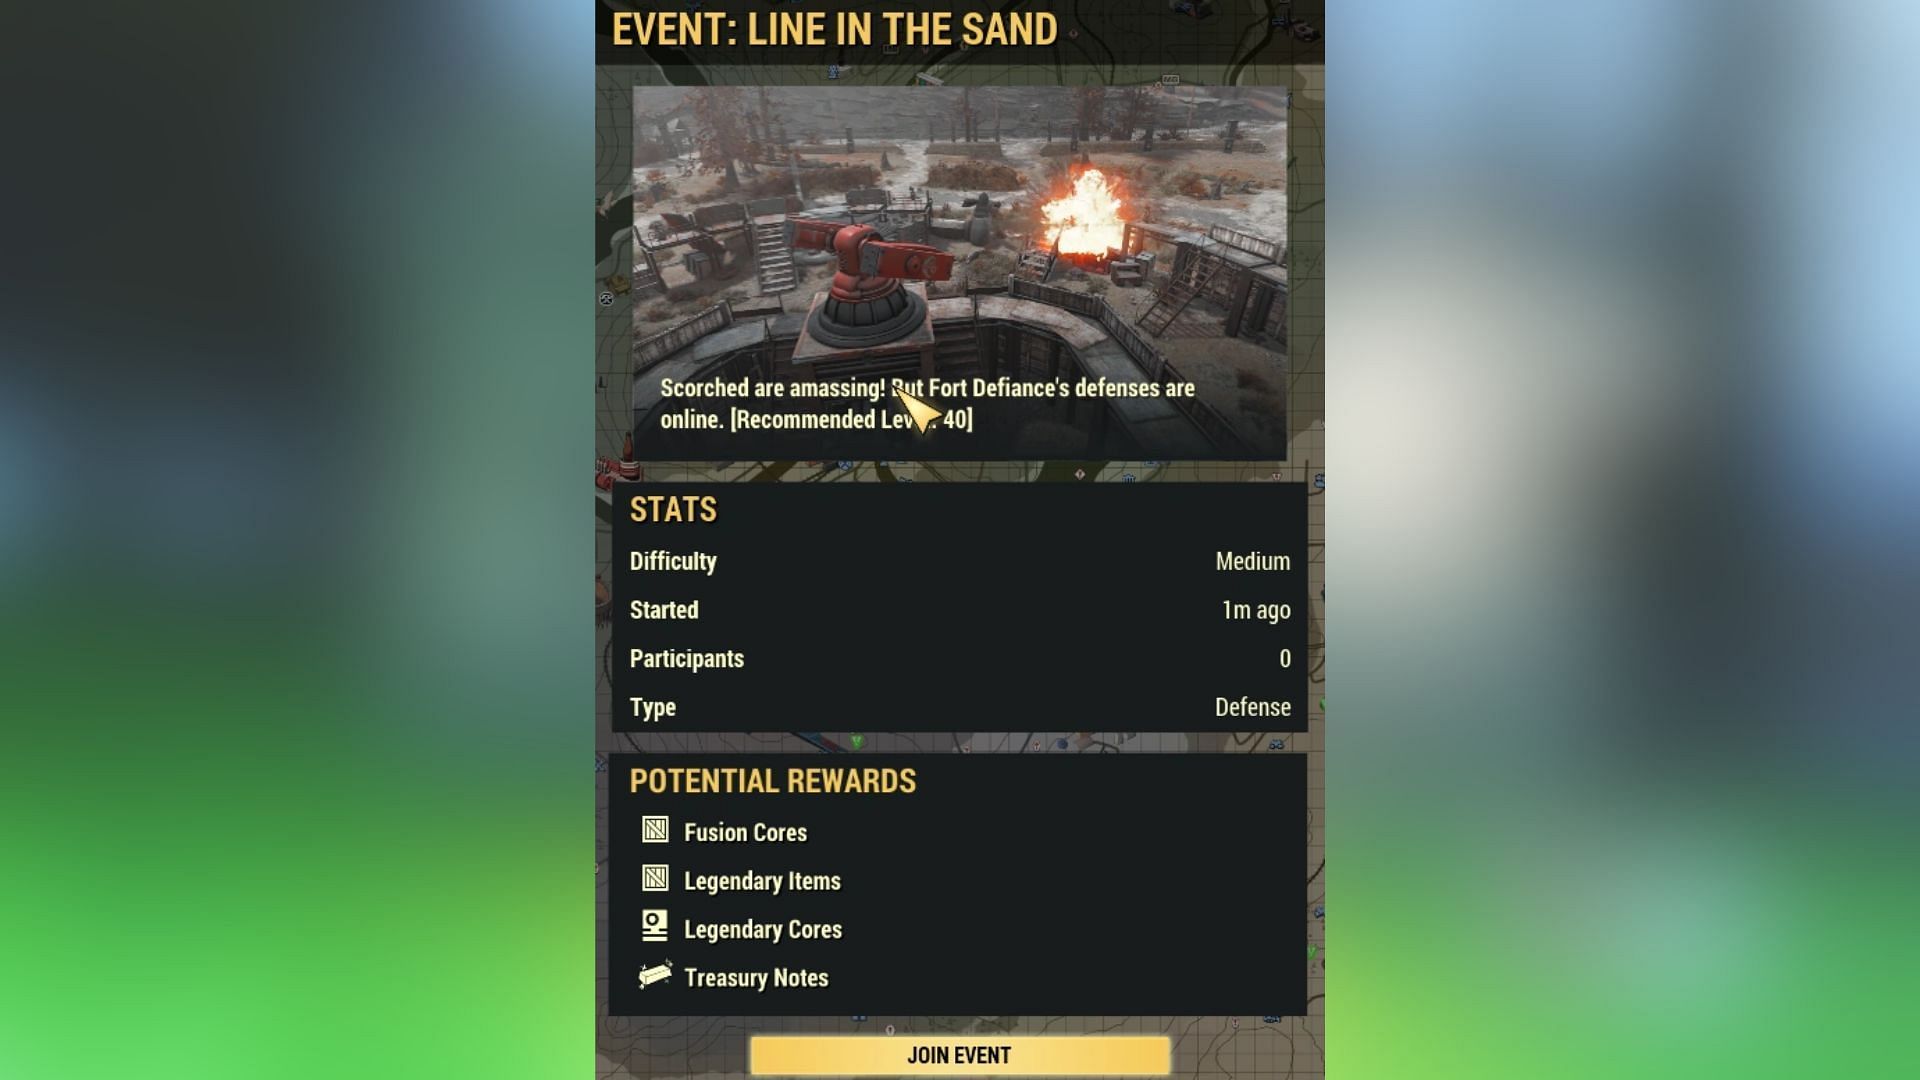 Players must avoid public events when playing Fallout 76 solo (Image via Bethesda Game Studios)